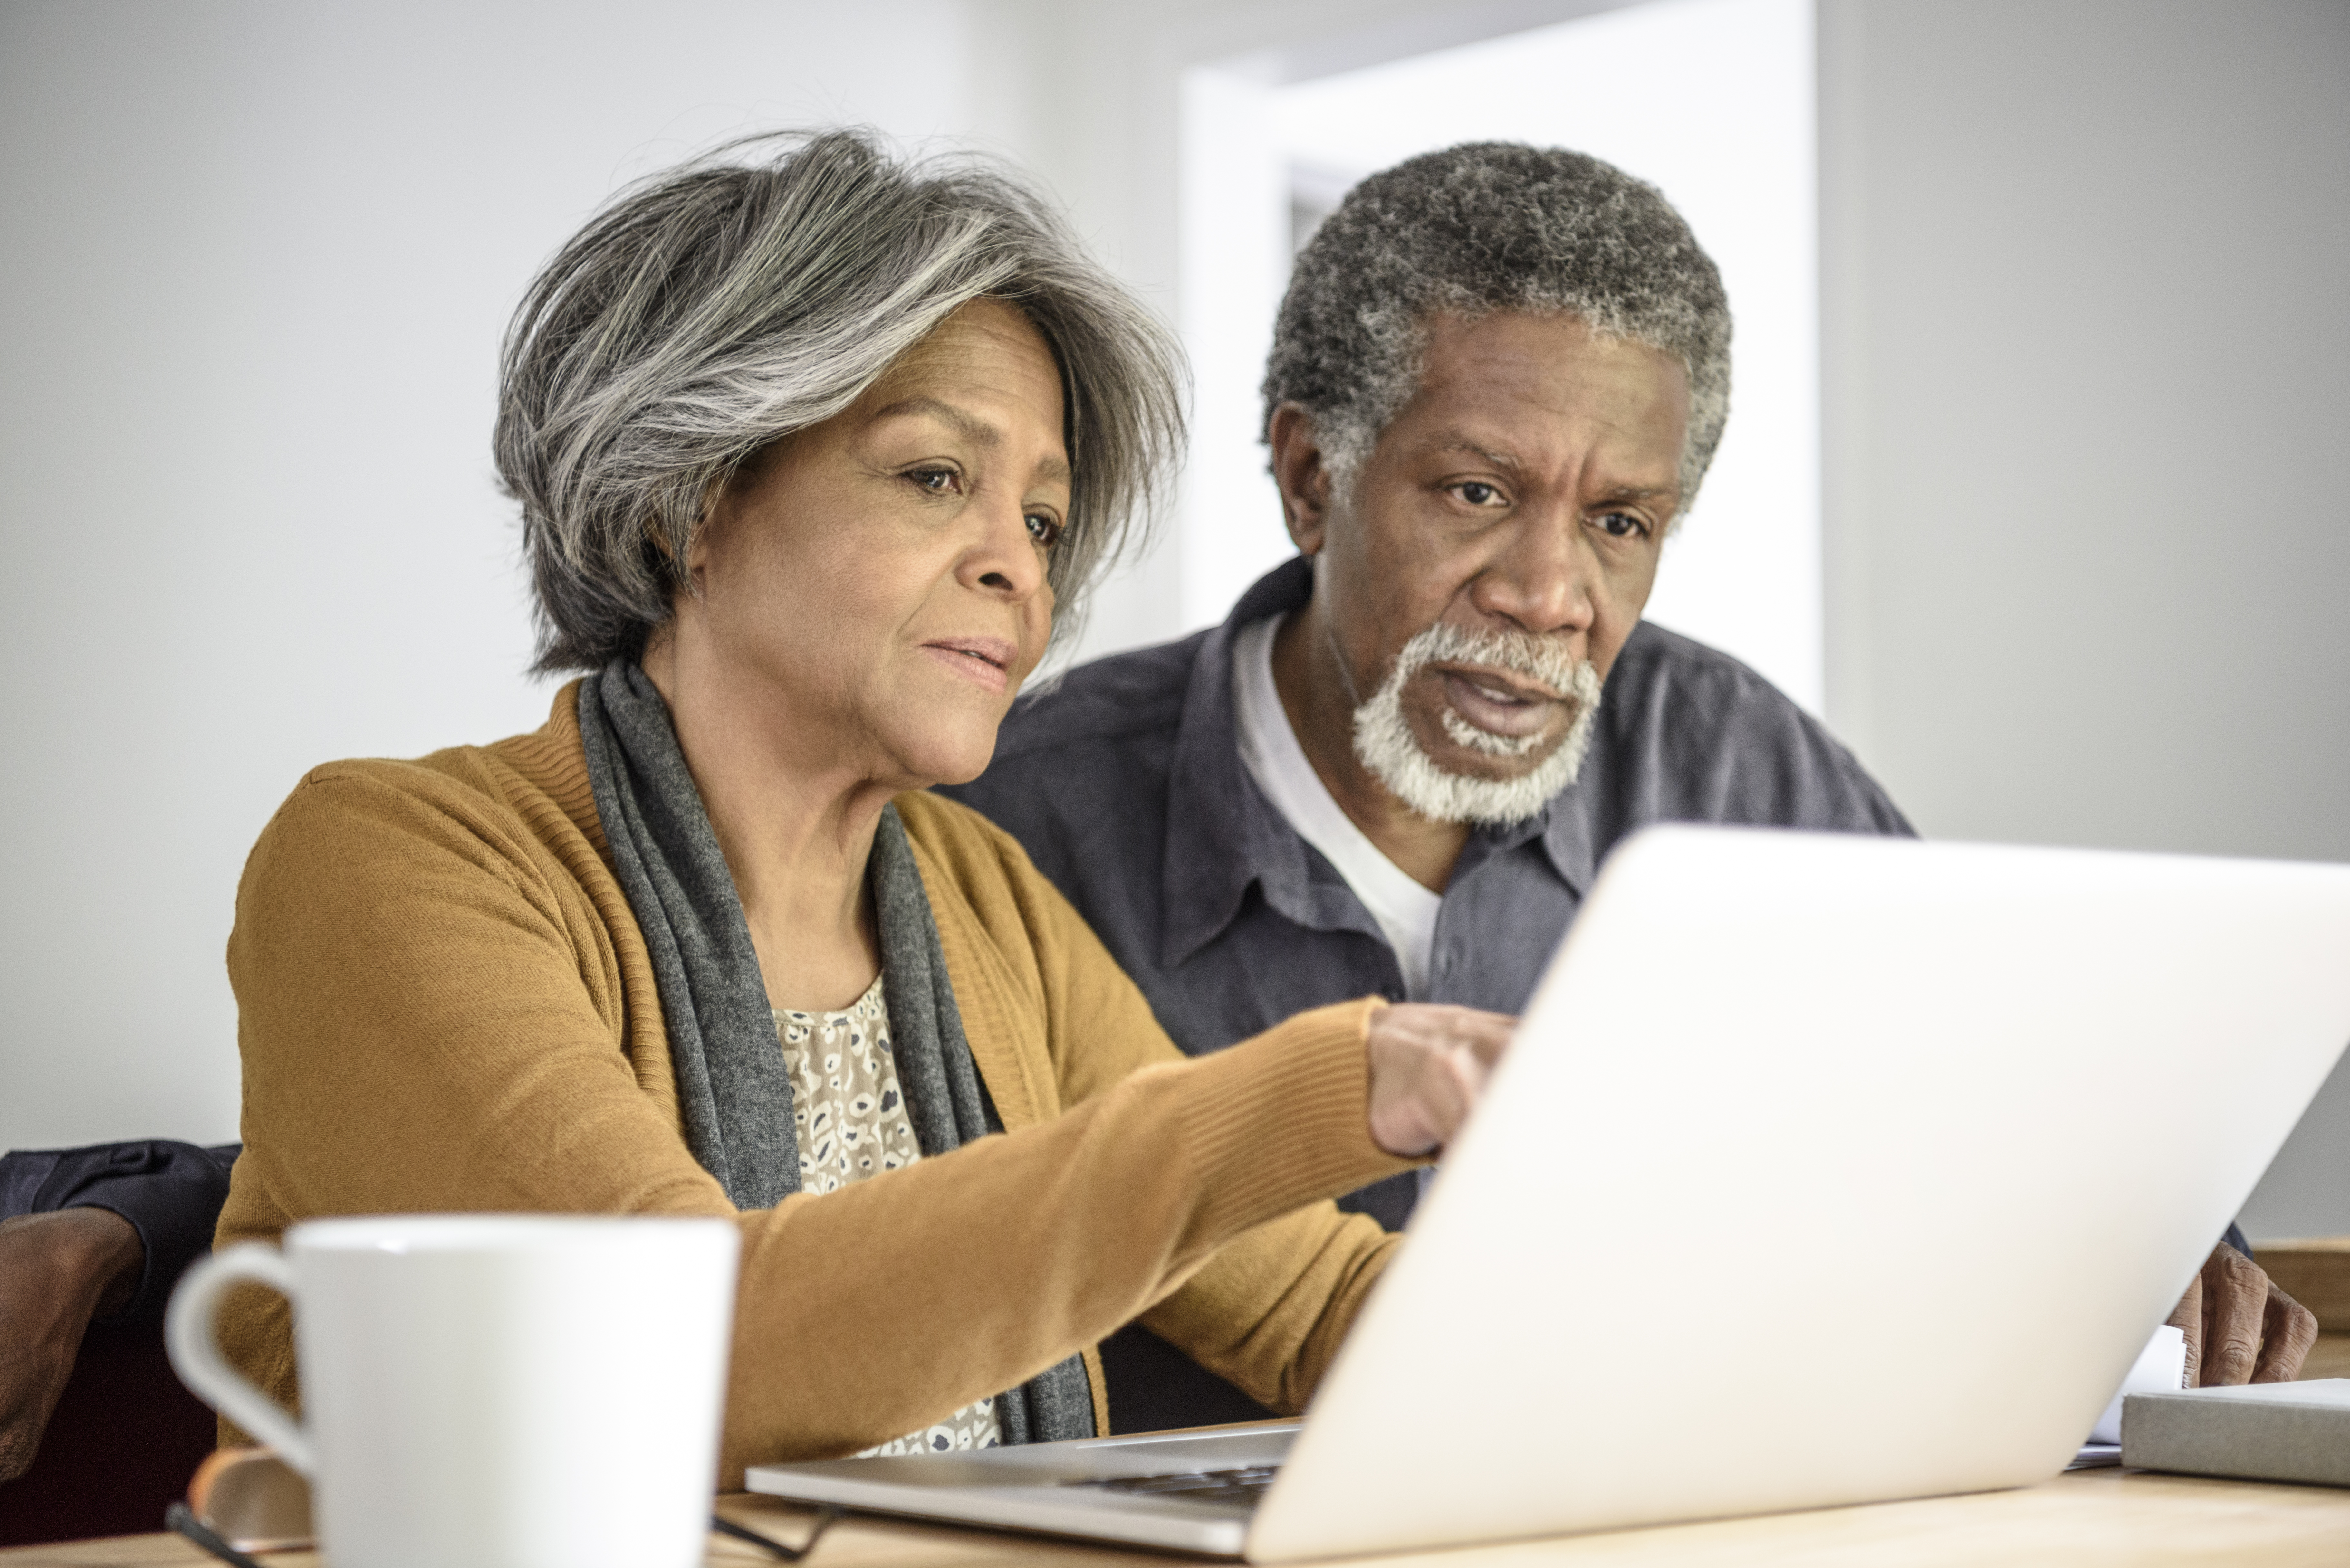 An older African American couple on laptop together with serious expression.